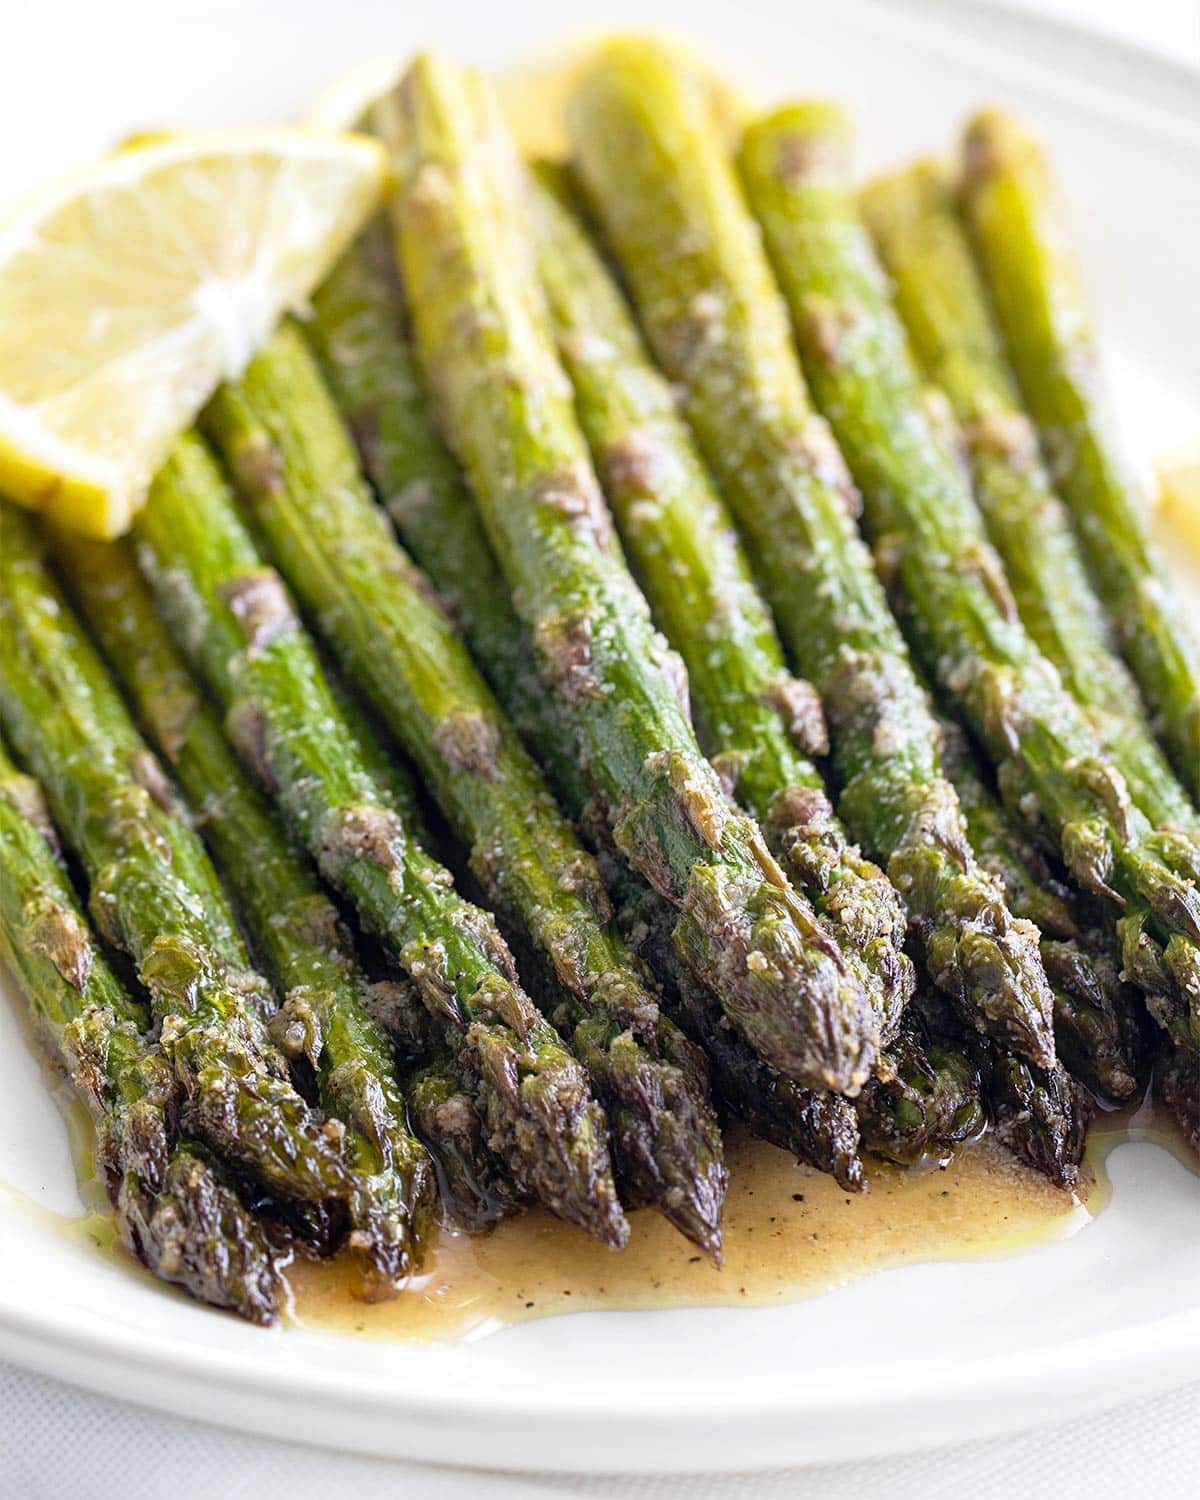 Roasted Asparagus - Craving Home Cooked